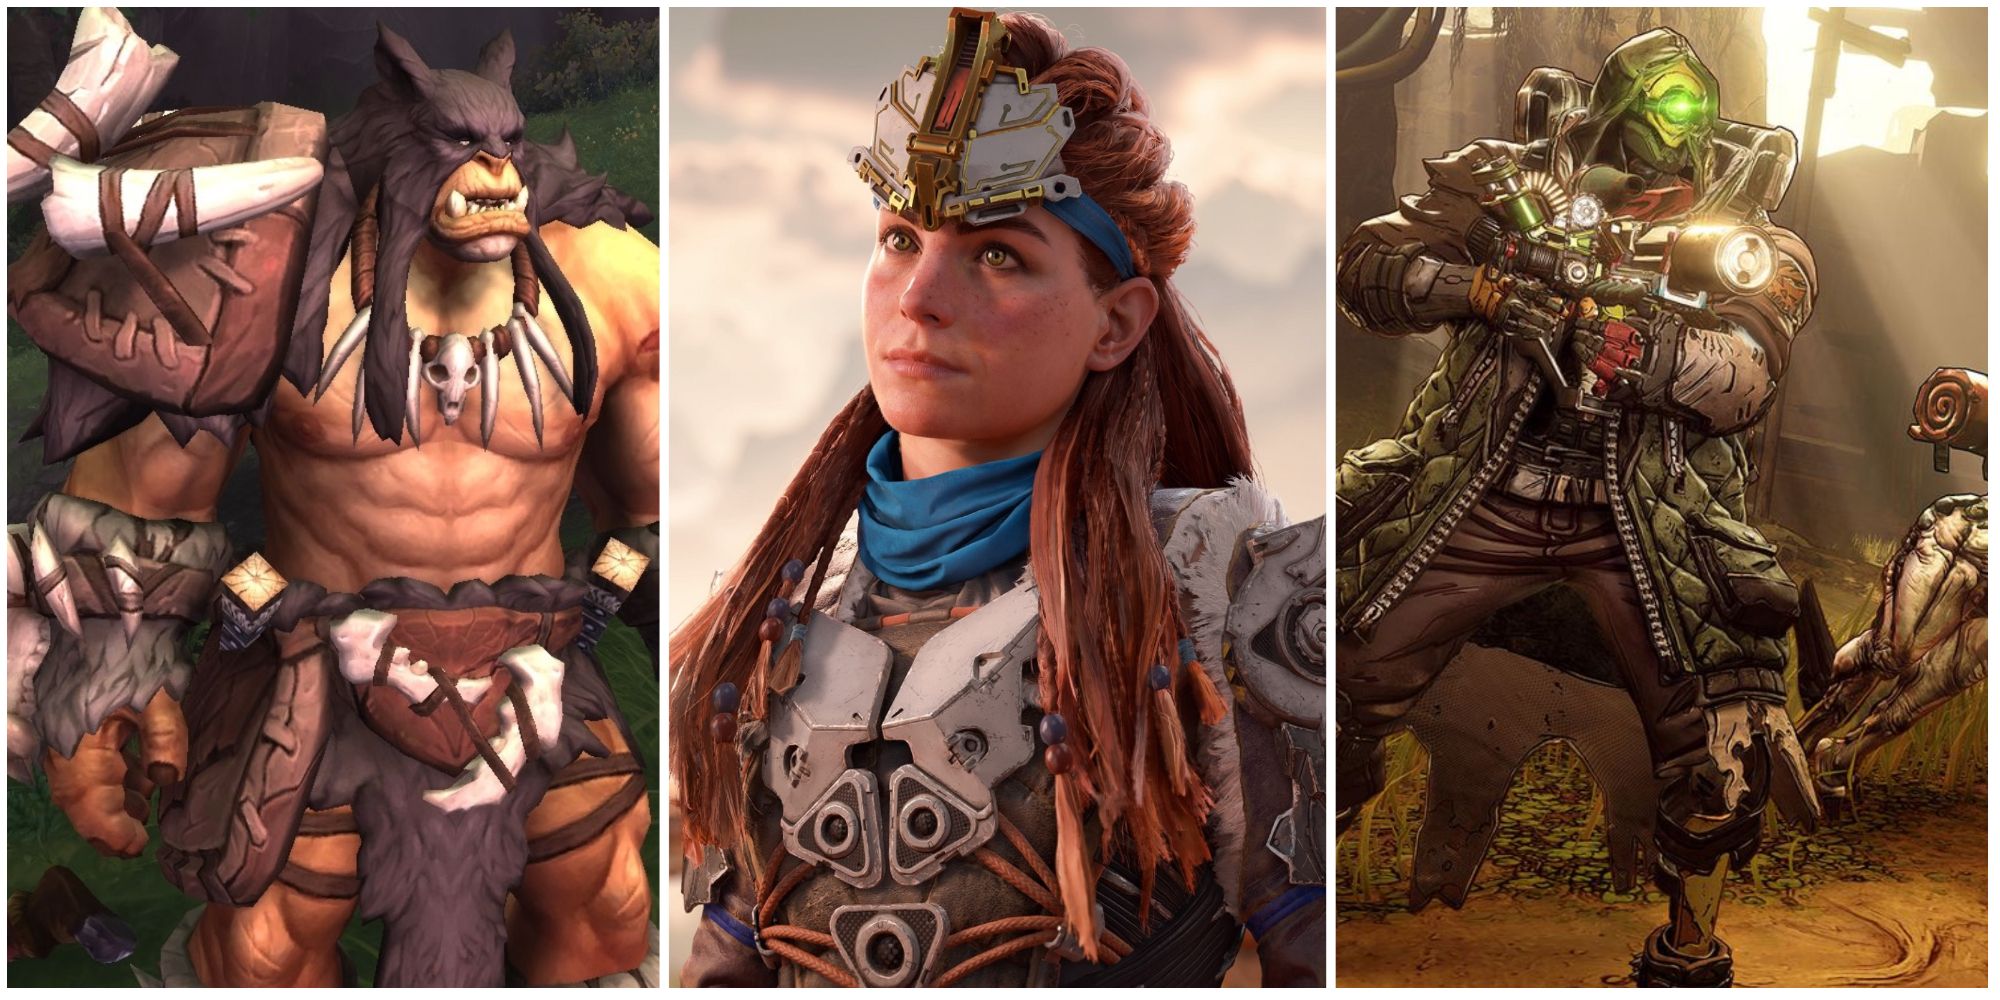 rexxor, aloy and fl4k in a photo collage